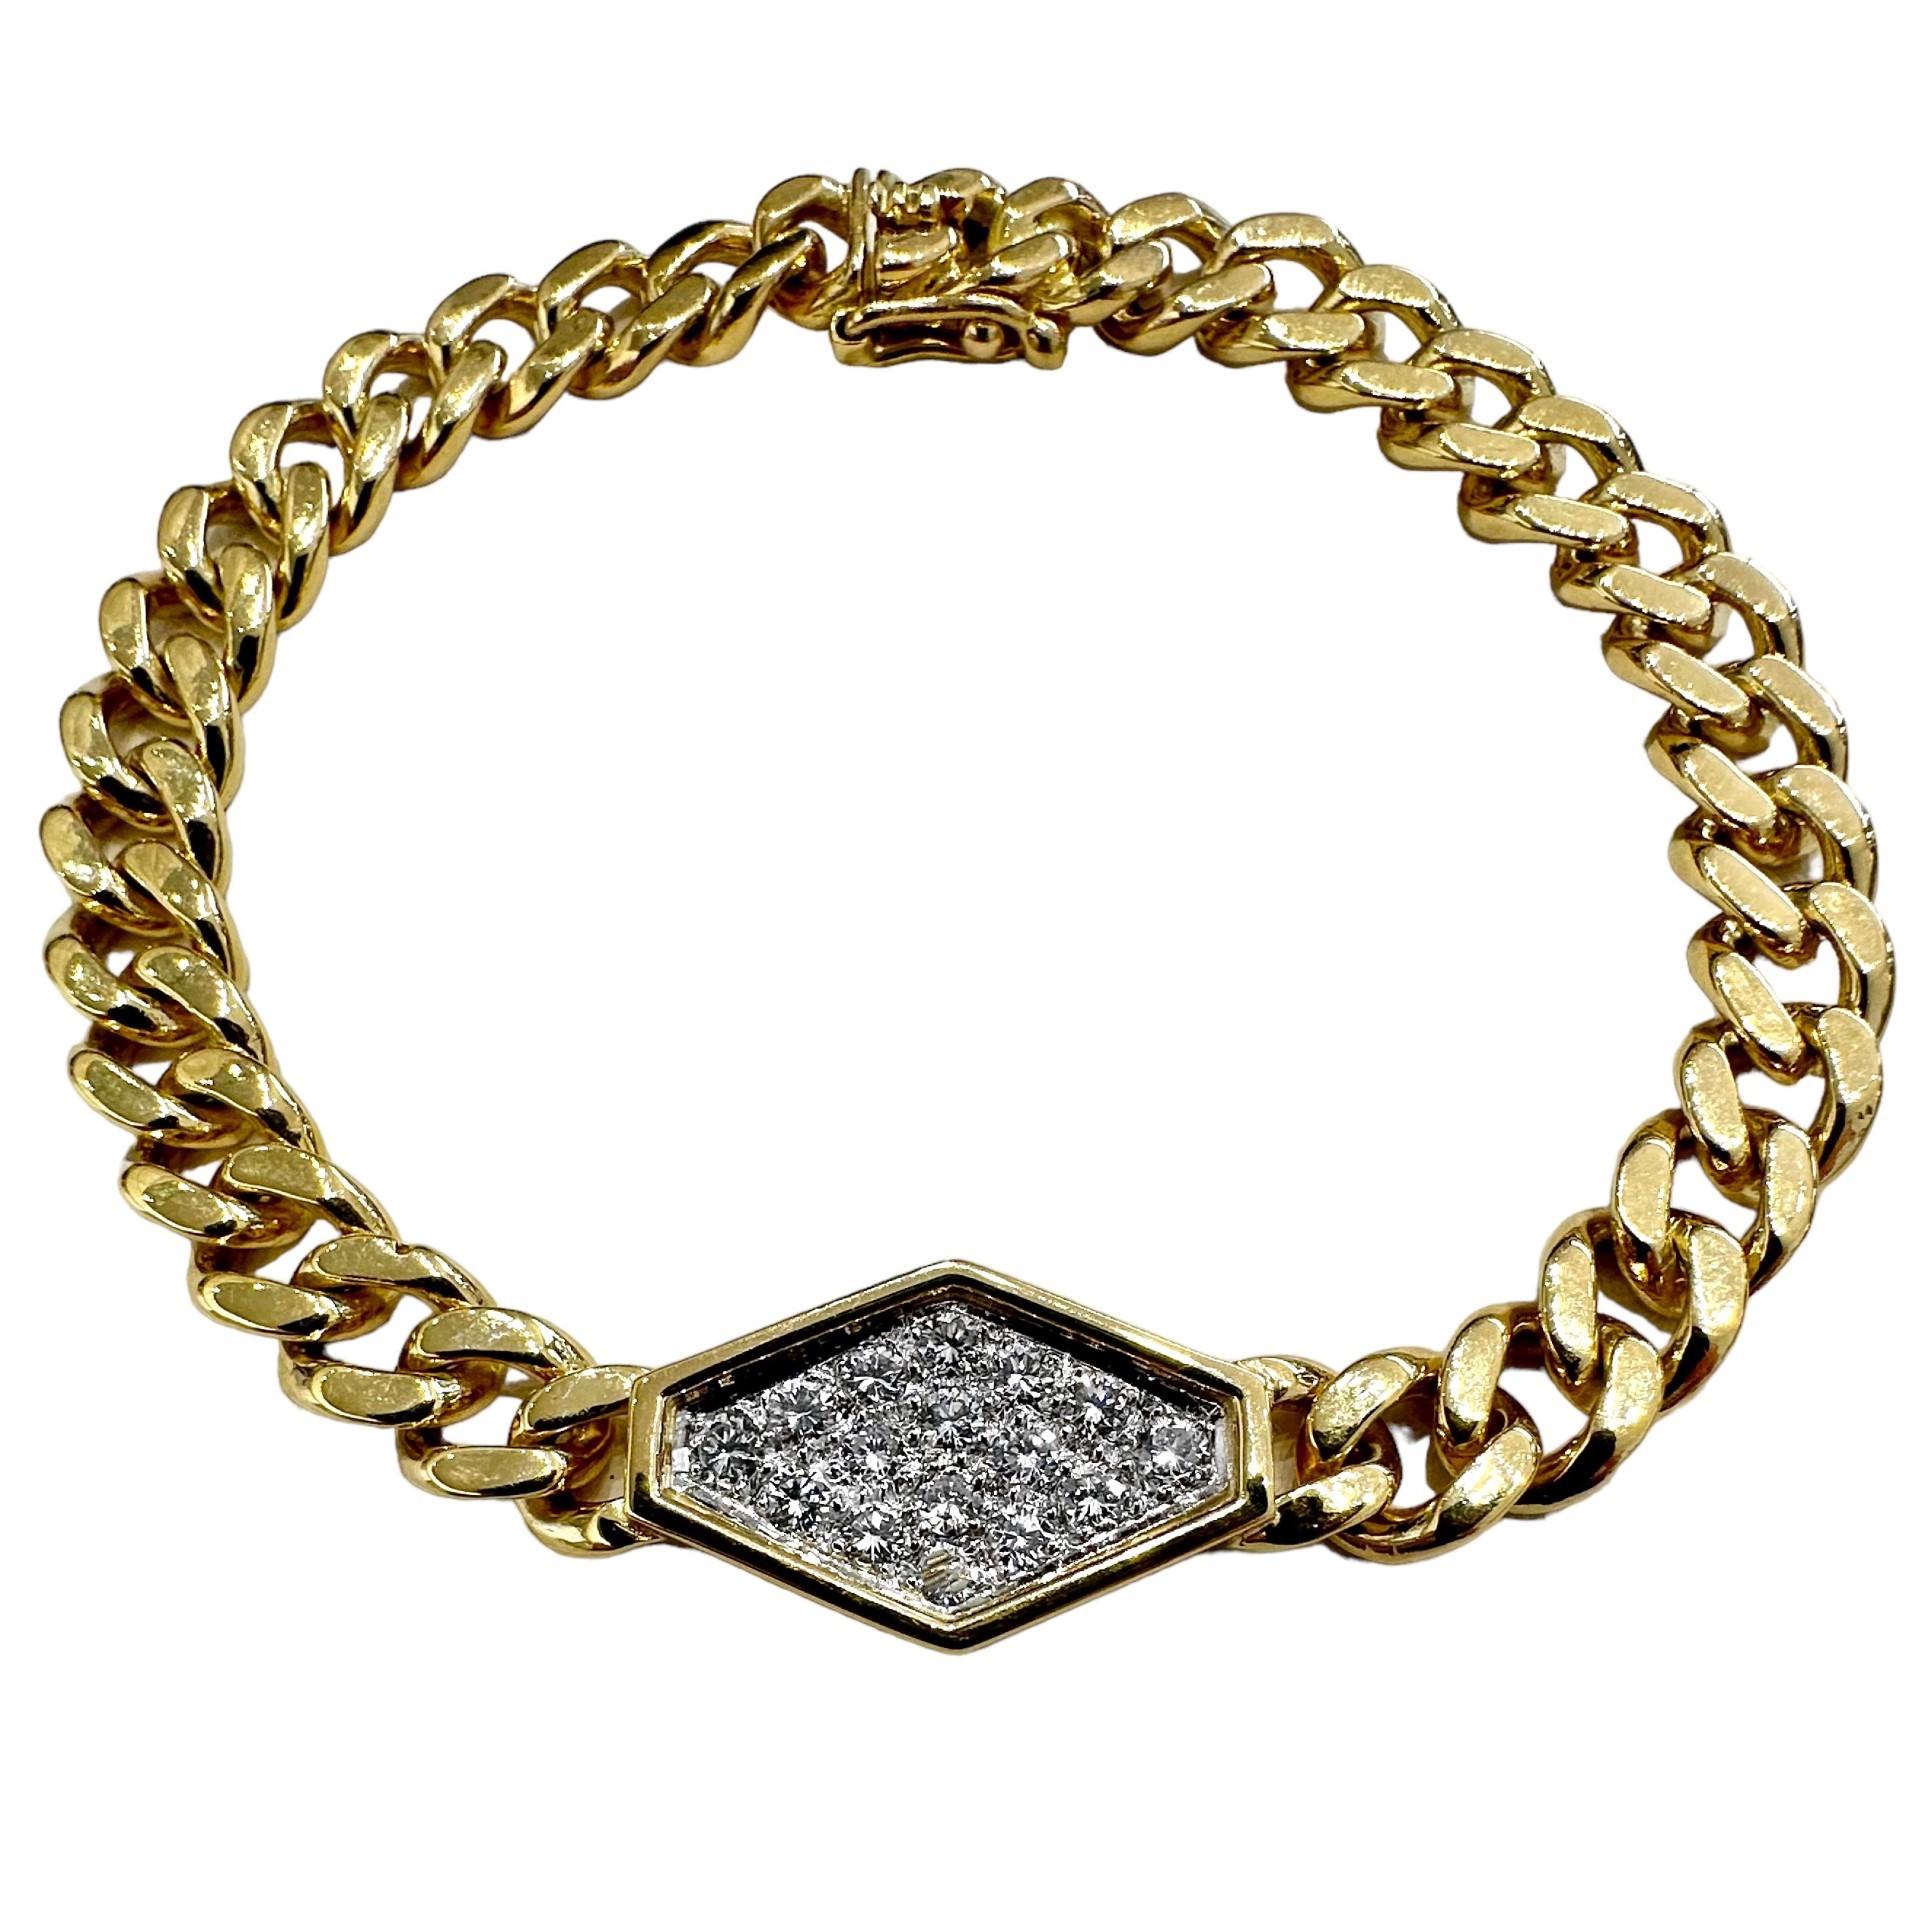 This lovely and casual 18k yellow gold bracelet, with it's origin in the late 20th century, is ideal for daytime or evening wear. It is comprised of a traditional Cuban link single strand with a pave set trapezoidal platinum plate at the center.